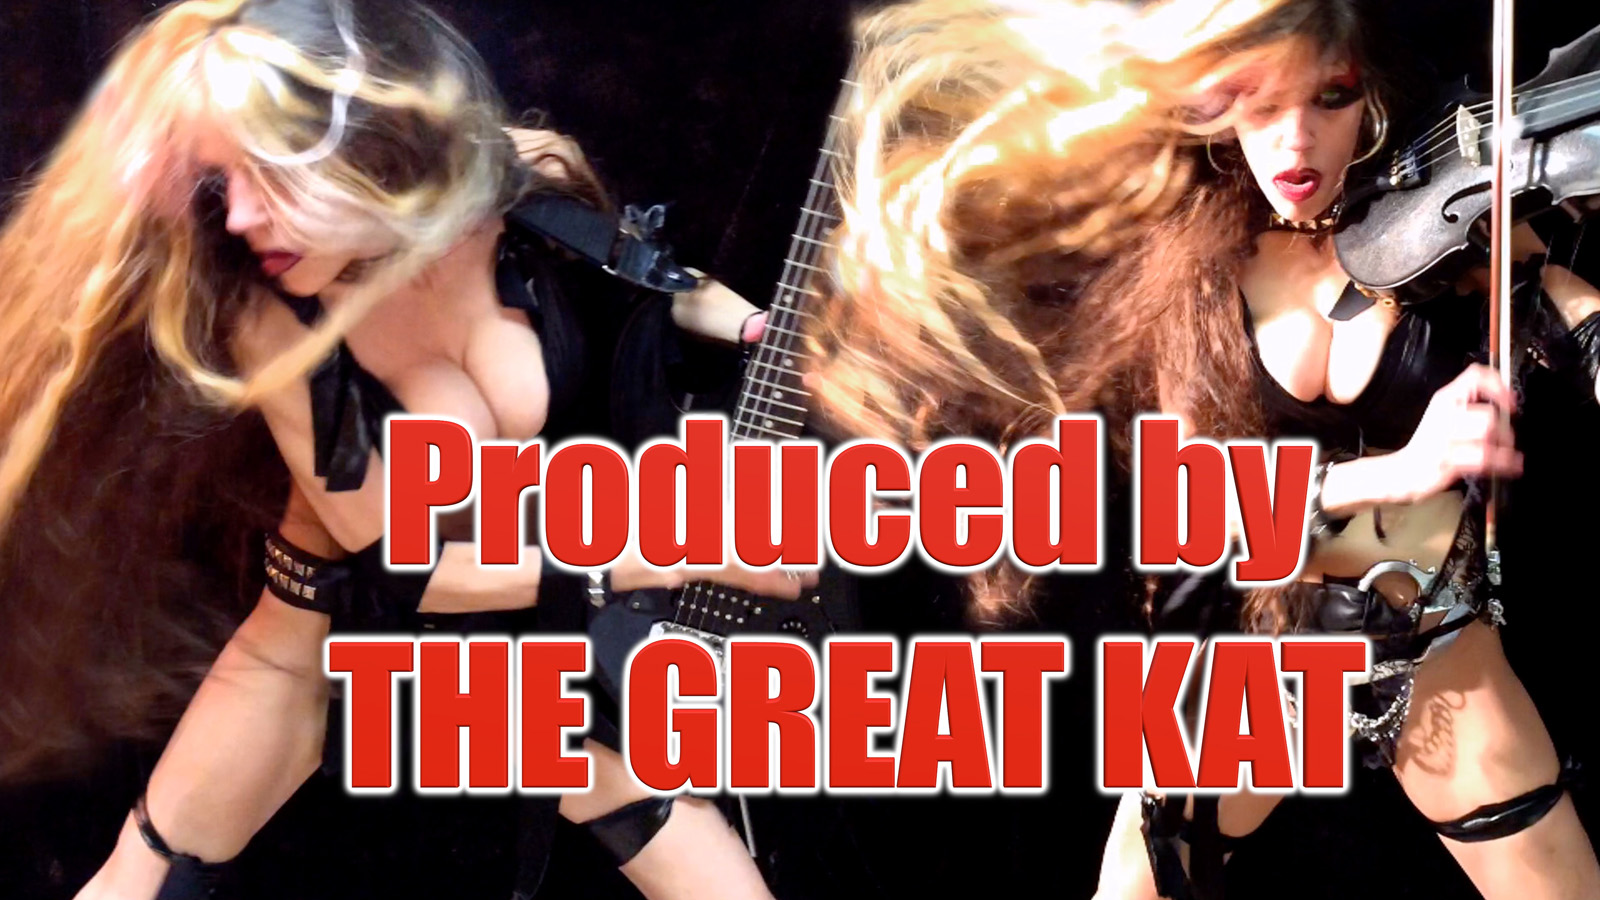 NEW DVD PRODUCED by THE GREAT KAT!